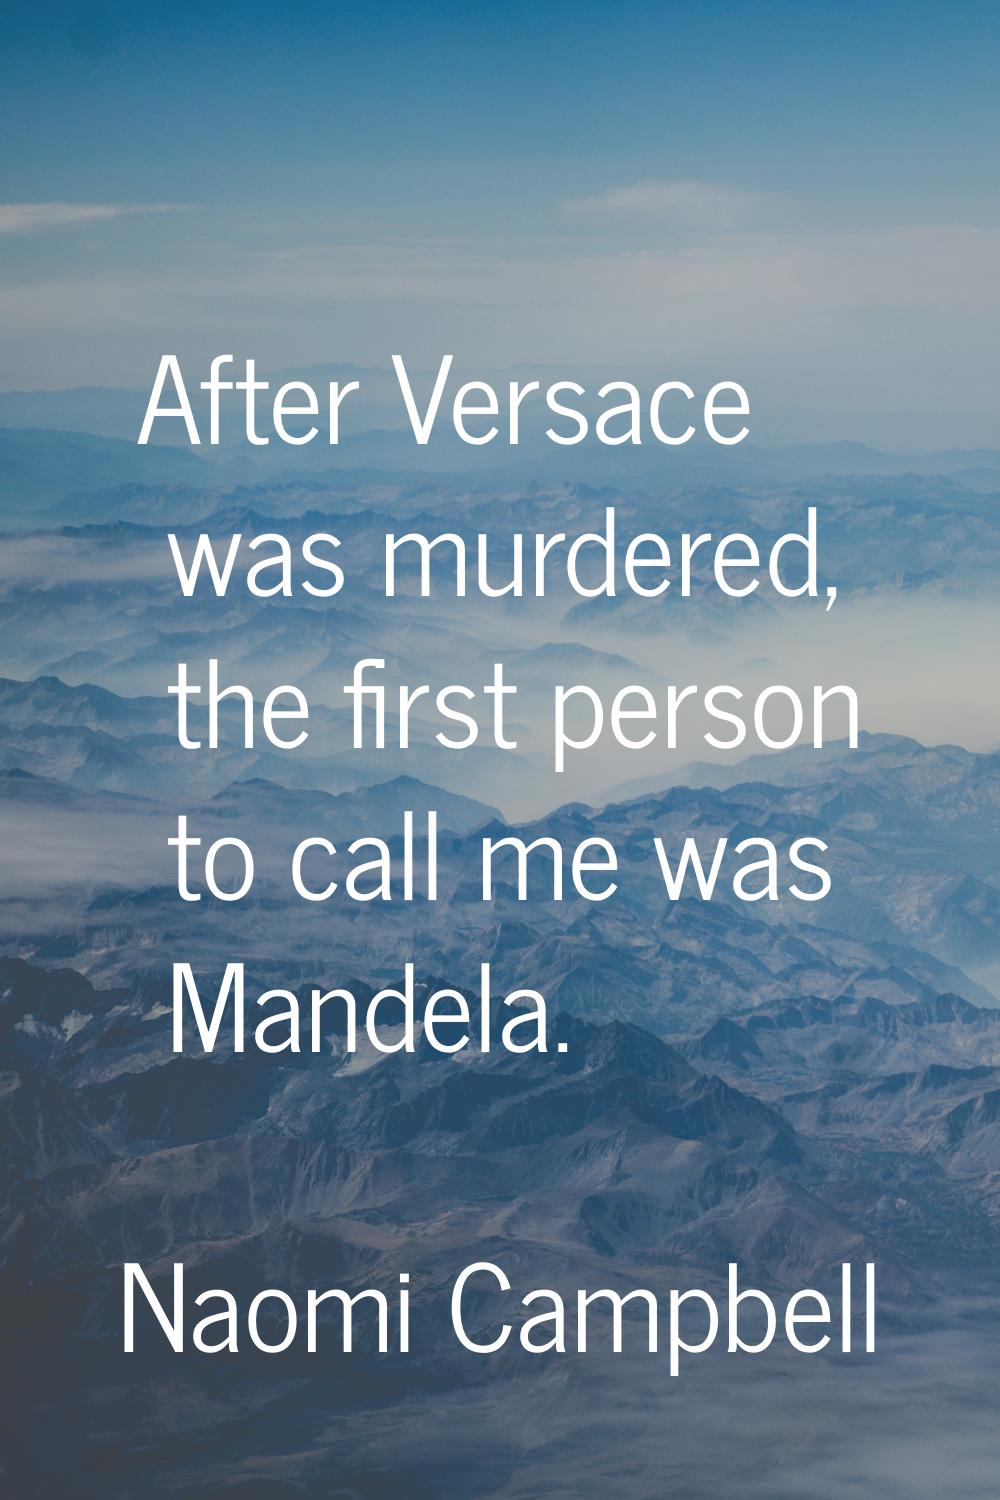 After Versace was murdered, the first person to call me was Mandela.